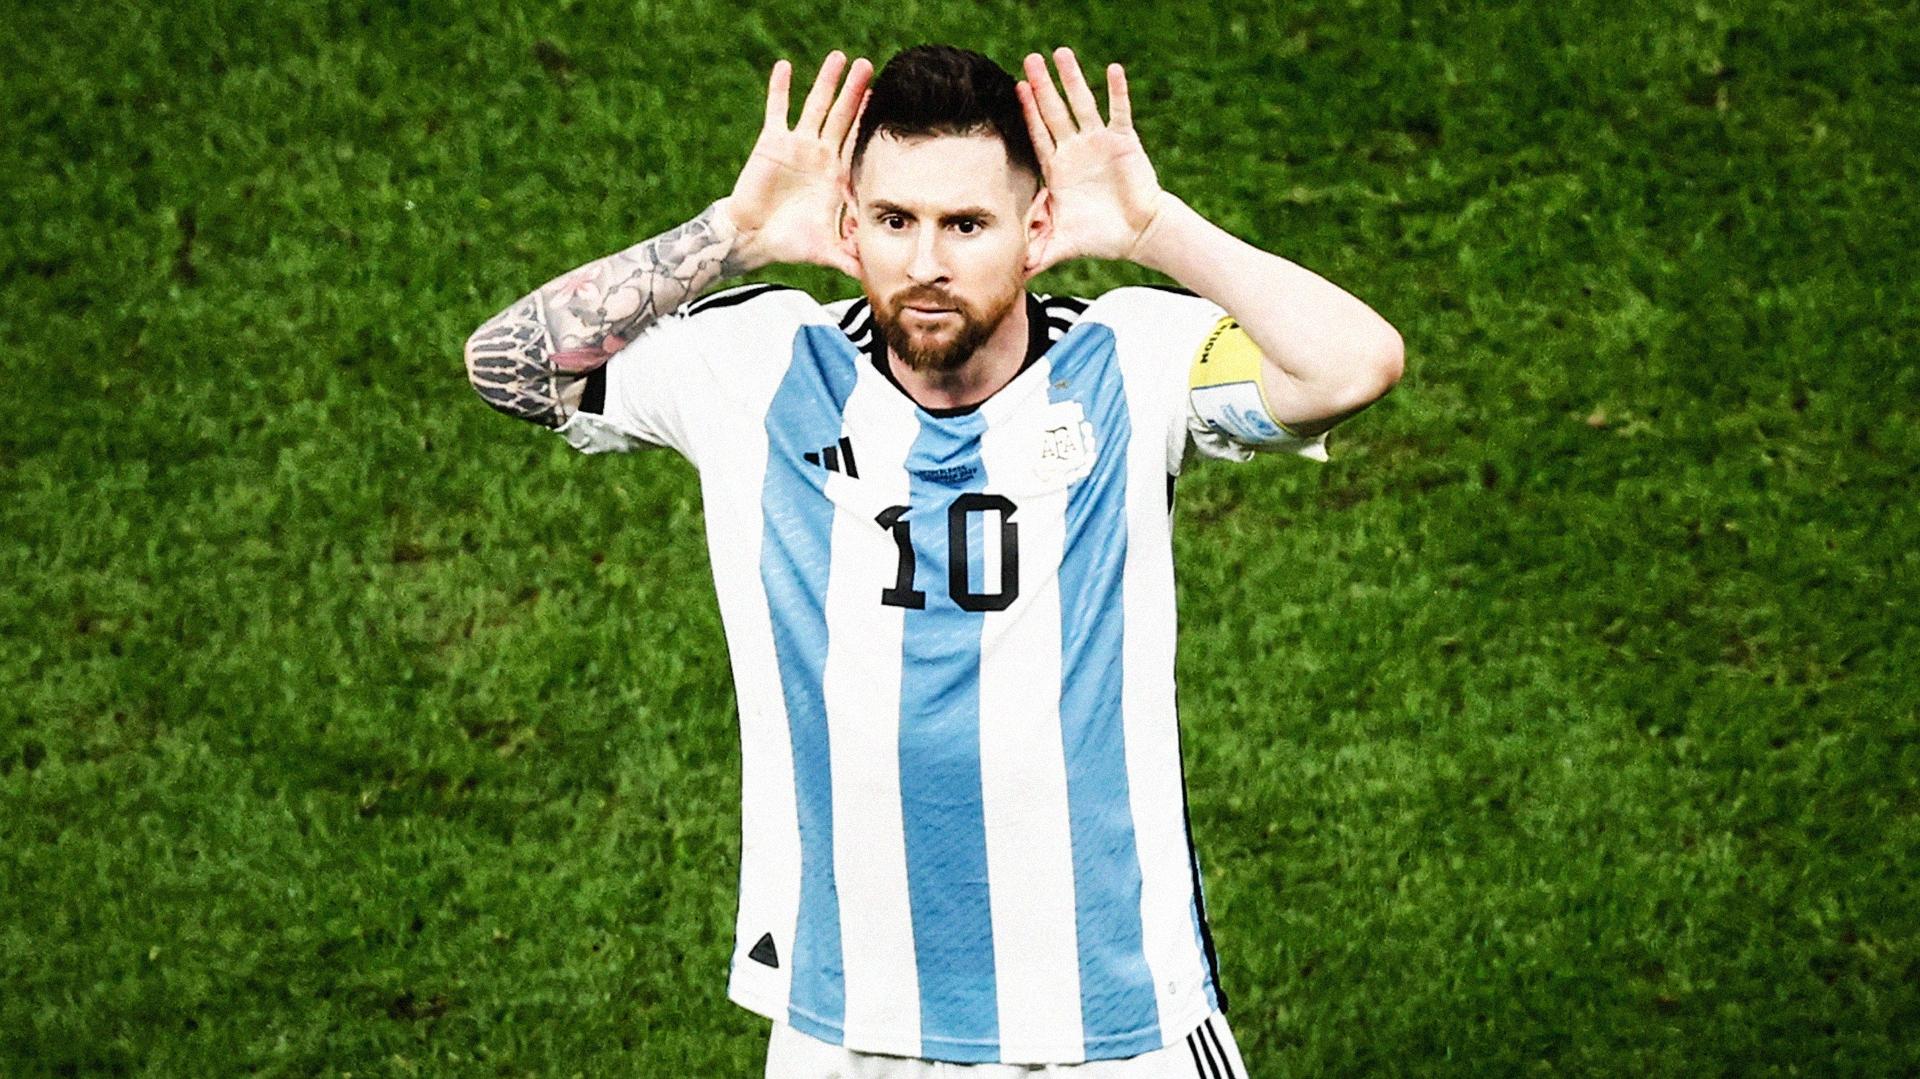 With Or Without A World Cup Win Messi Has Shown He S The Goat At